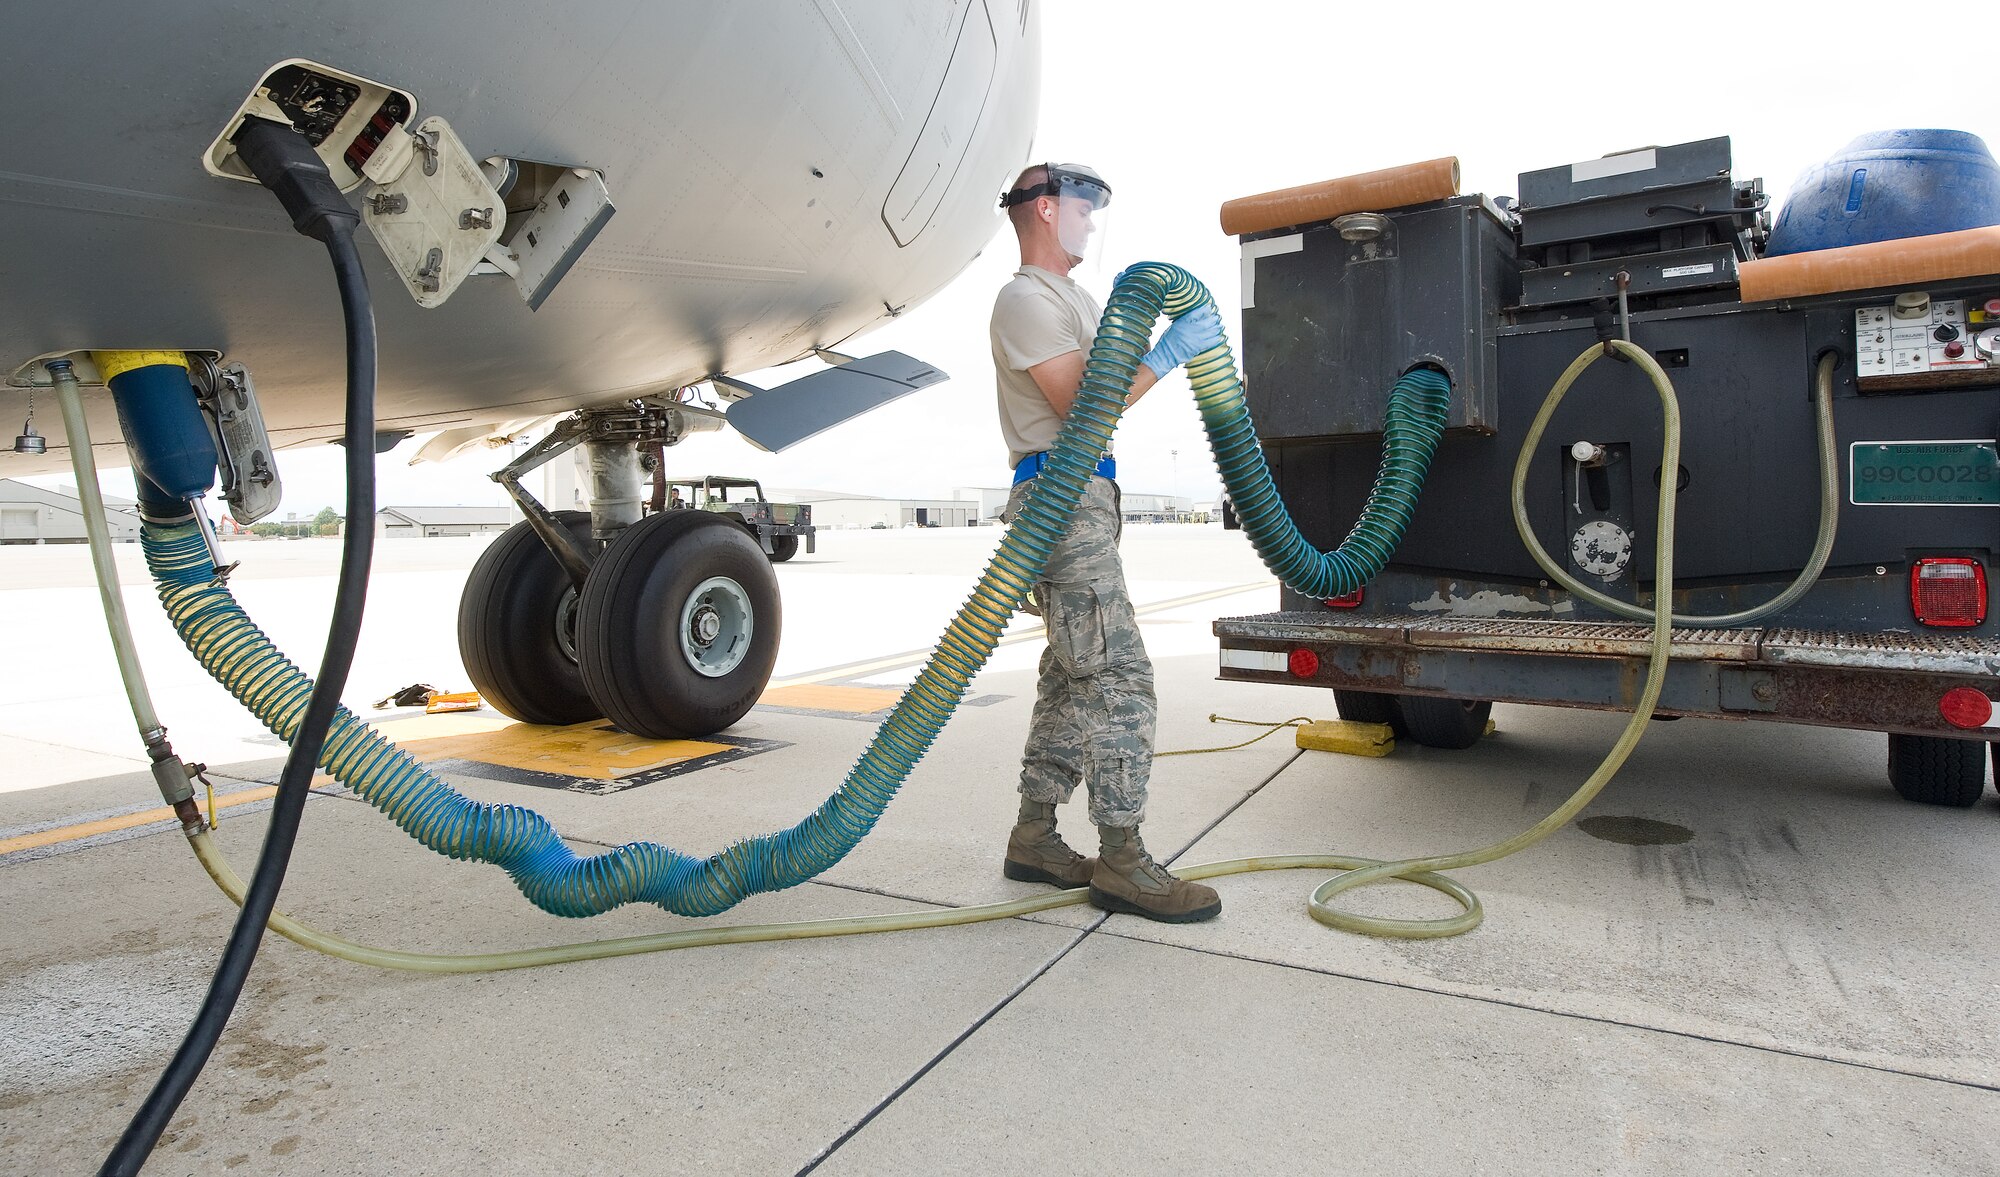 Airman 1st Class Christopher Bell, a ramp specialist with the 436th Aerial Port Squadron, drains waste from a C-17 Globemaster III Sept. 7, 2011, at Dover Air Force Base, Del. The 436 APS ramp services shop loads, unloads, cleans and sanitizes all planes flying to and from Dover AFB. (U.S. Air Force photo by Roland Balik)